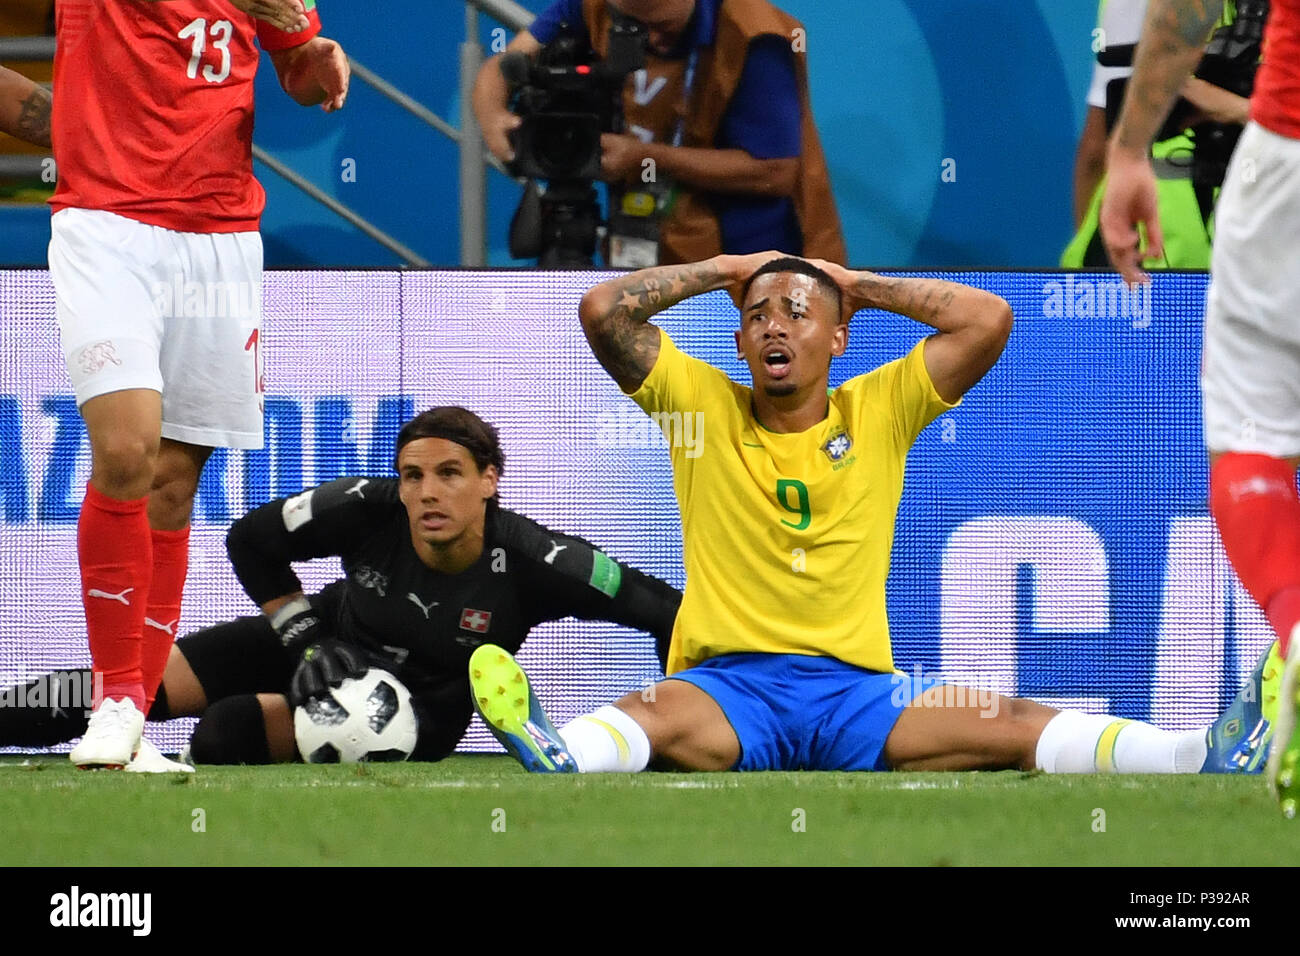 Rostov On Don, Russland. 17th June, 2018. GABRIEL JESUS (BRA), disappointment, frustrated, disappointed, frustrated, dejected after missed goal chance. hi: Yann SUMMER, goalie (SUI), action, Brazil (BRA) -Swiss (SUI) 1-1, preliminary round, Group E, match 09, on 17.06.2018 in Rostov-on-Don, Rostov Arena. Football World Cup 2018 in Russia from 14.06. - 15.07.2018. | usage worldwide Credit: dpa/Alamy Live News Stock Photo